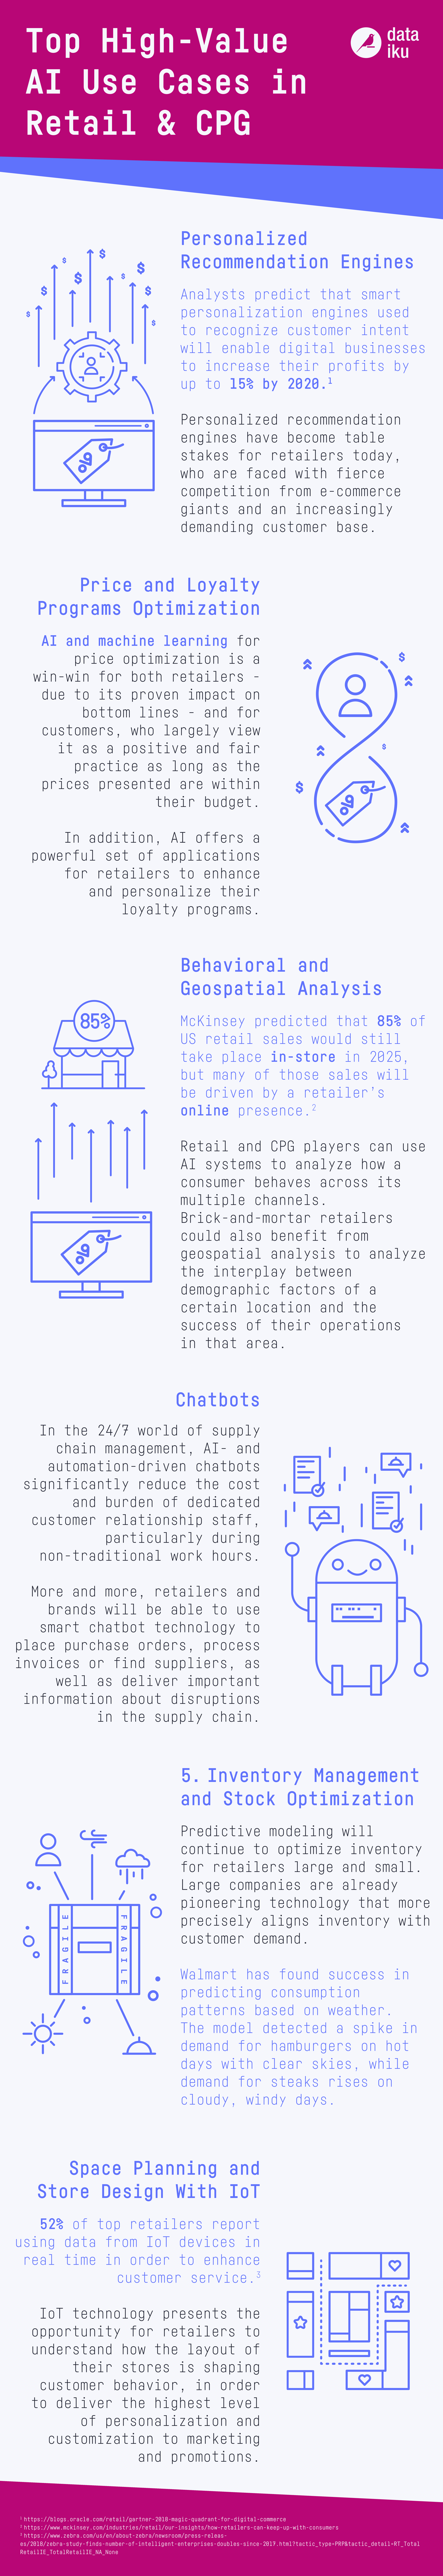 GM876-DAC Infographics for Retail White Paper 2019_Top_High_Value